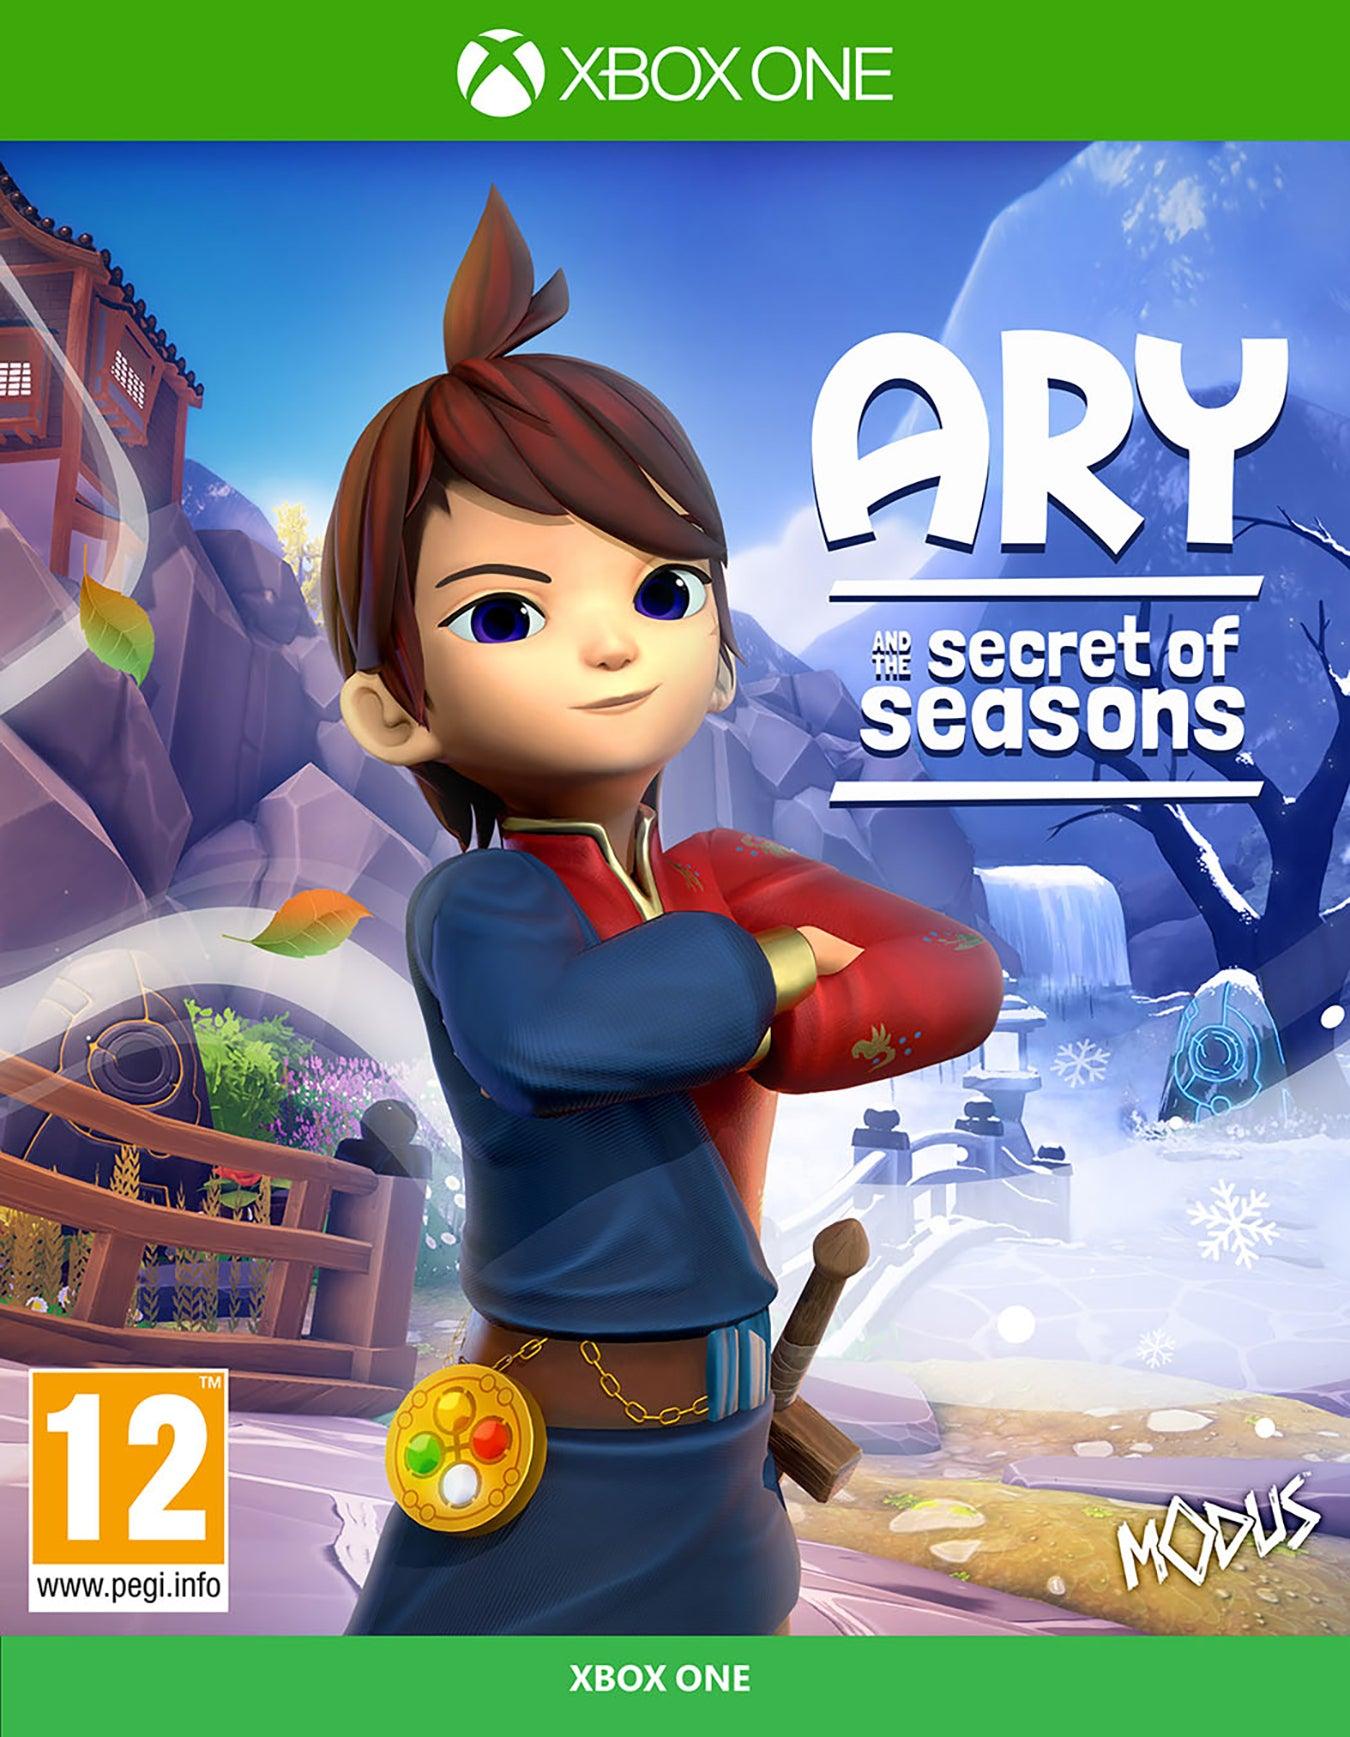 Ary And The Secret Of Seasons - Want a New Gadget